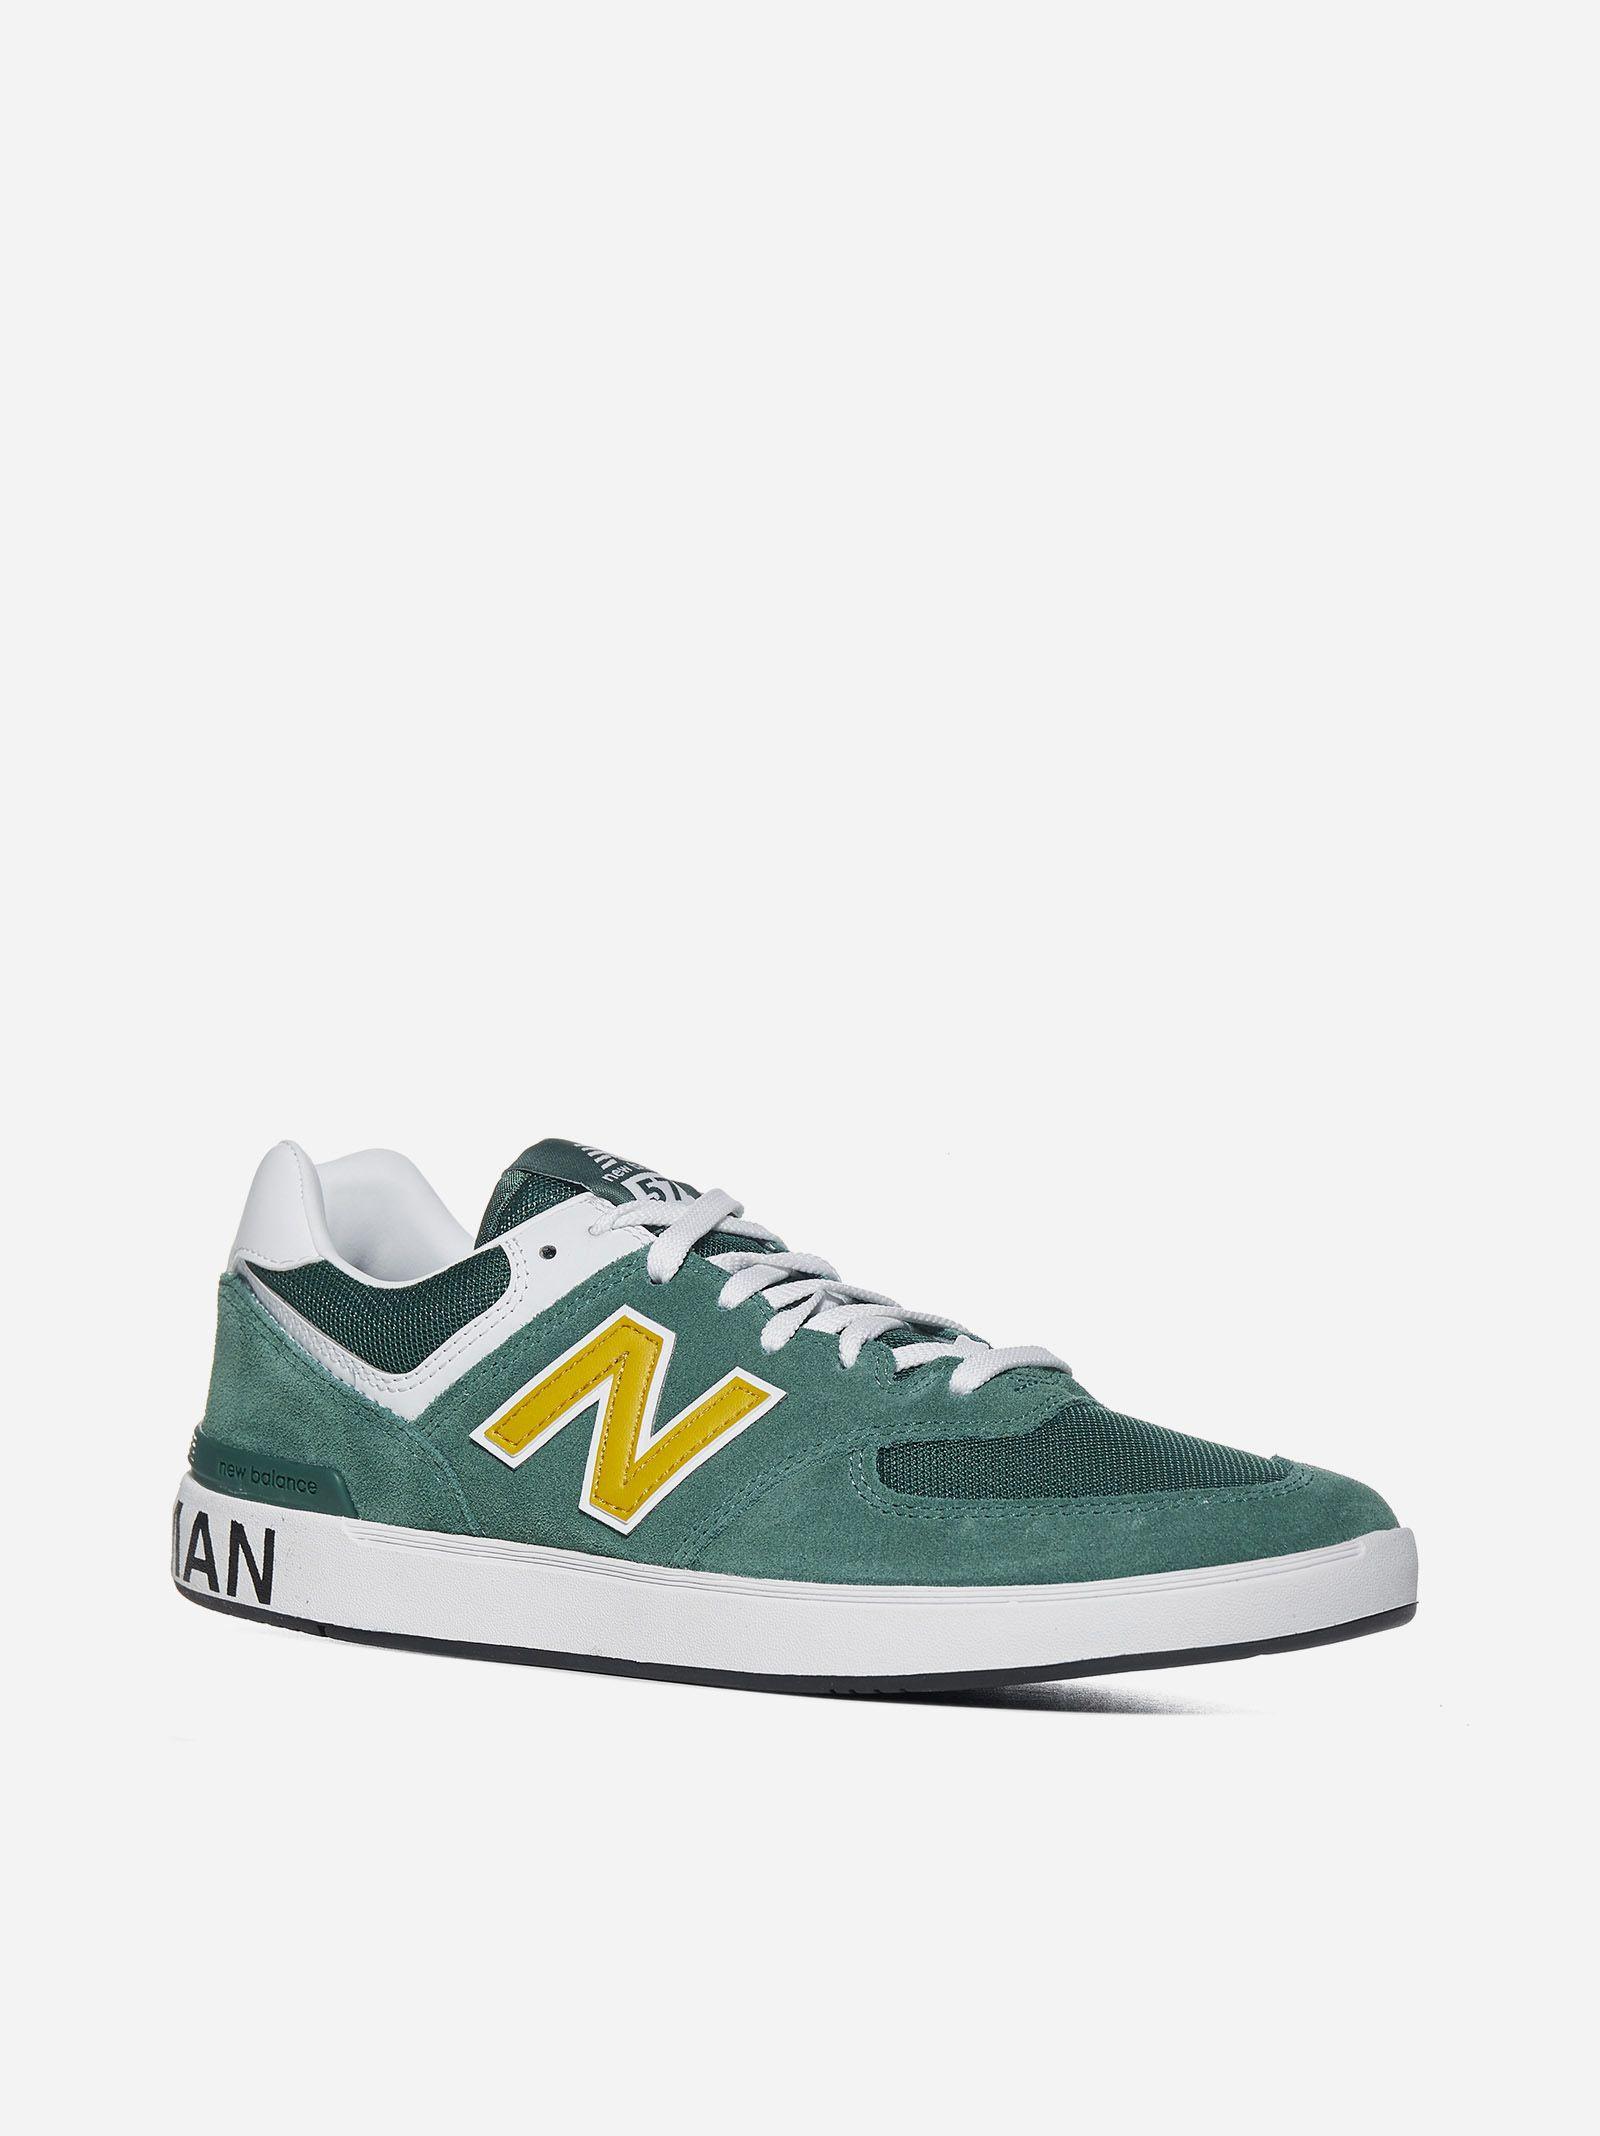 Junya Watanabe New Balance Am 574 Suede Sneakers in Green for Men | Lyst